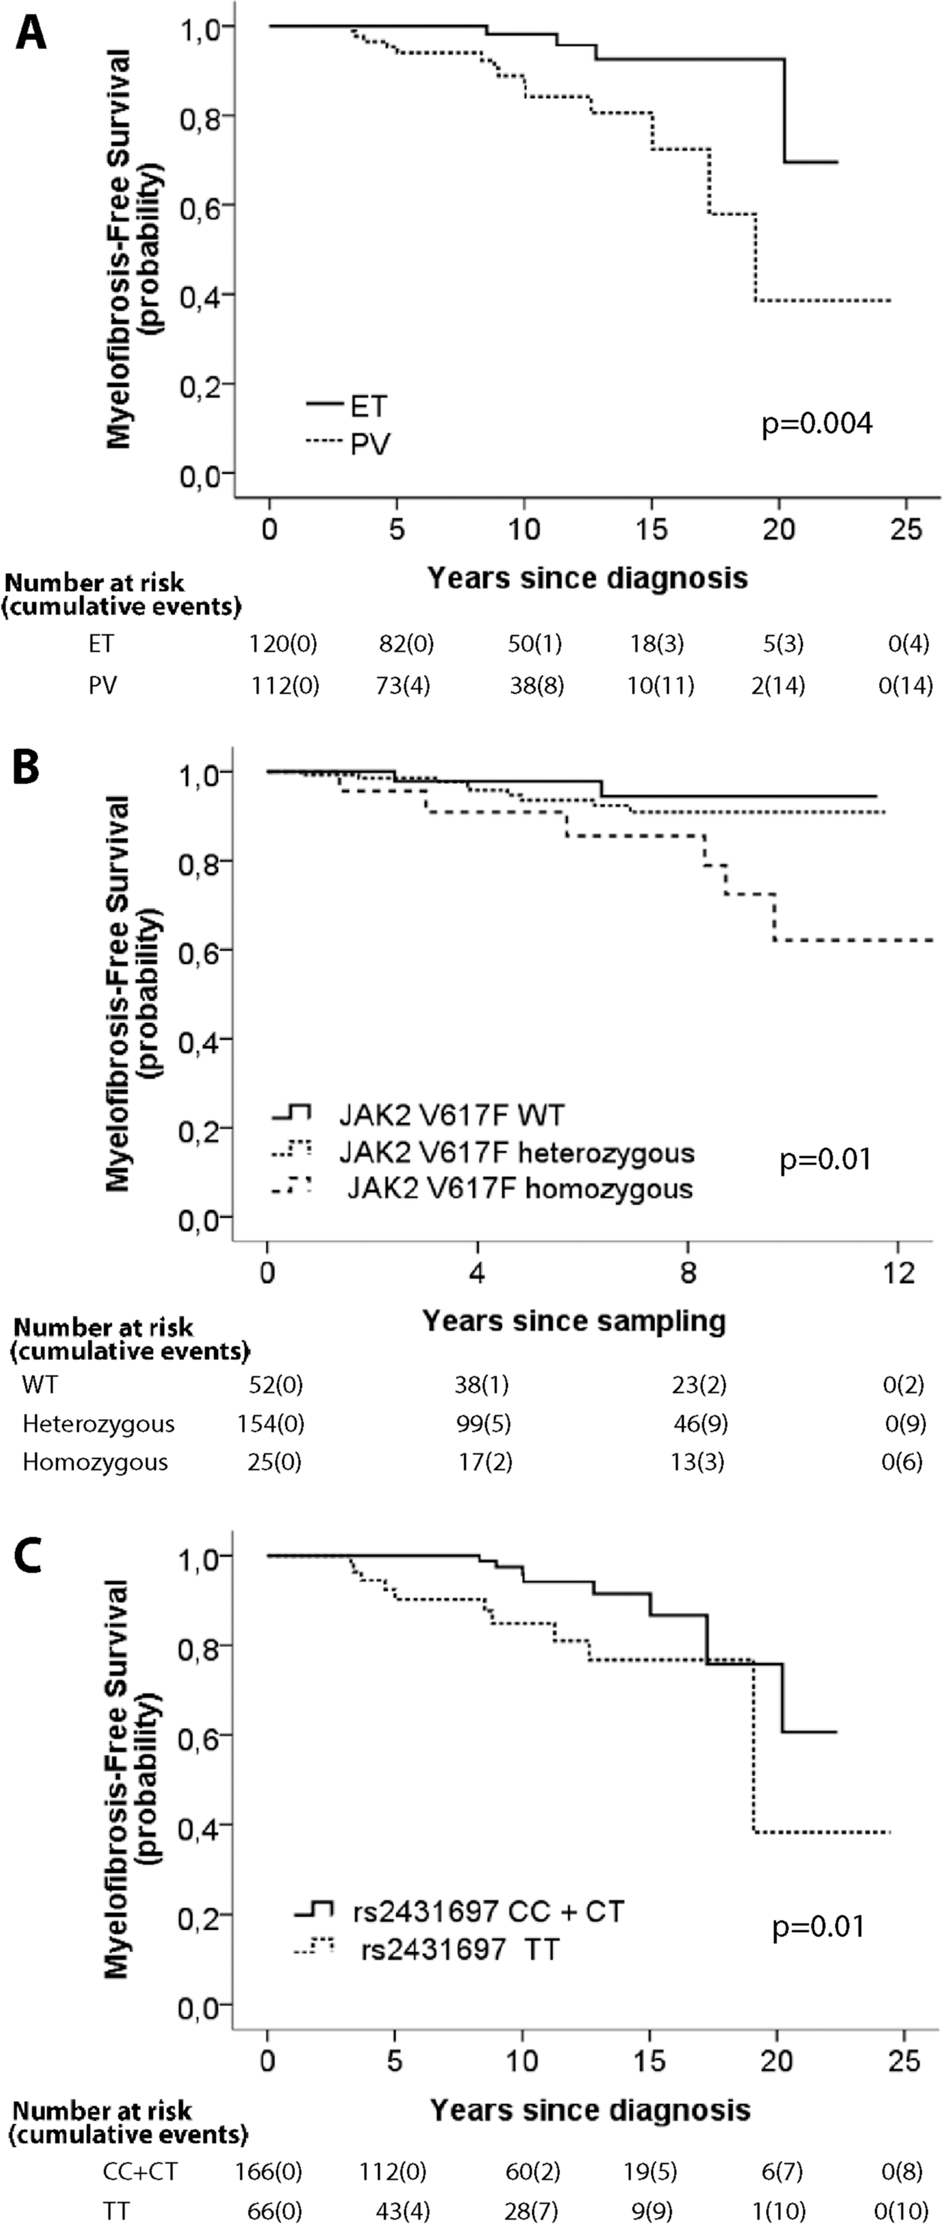 miR-146a rs2431697 identifies myeloproliferative neoplasm patients with  higher secondary myelofibrosis progression risk | Leukemia